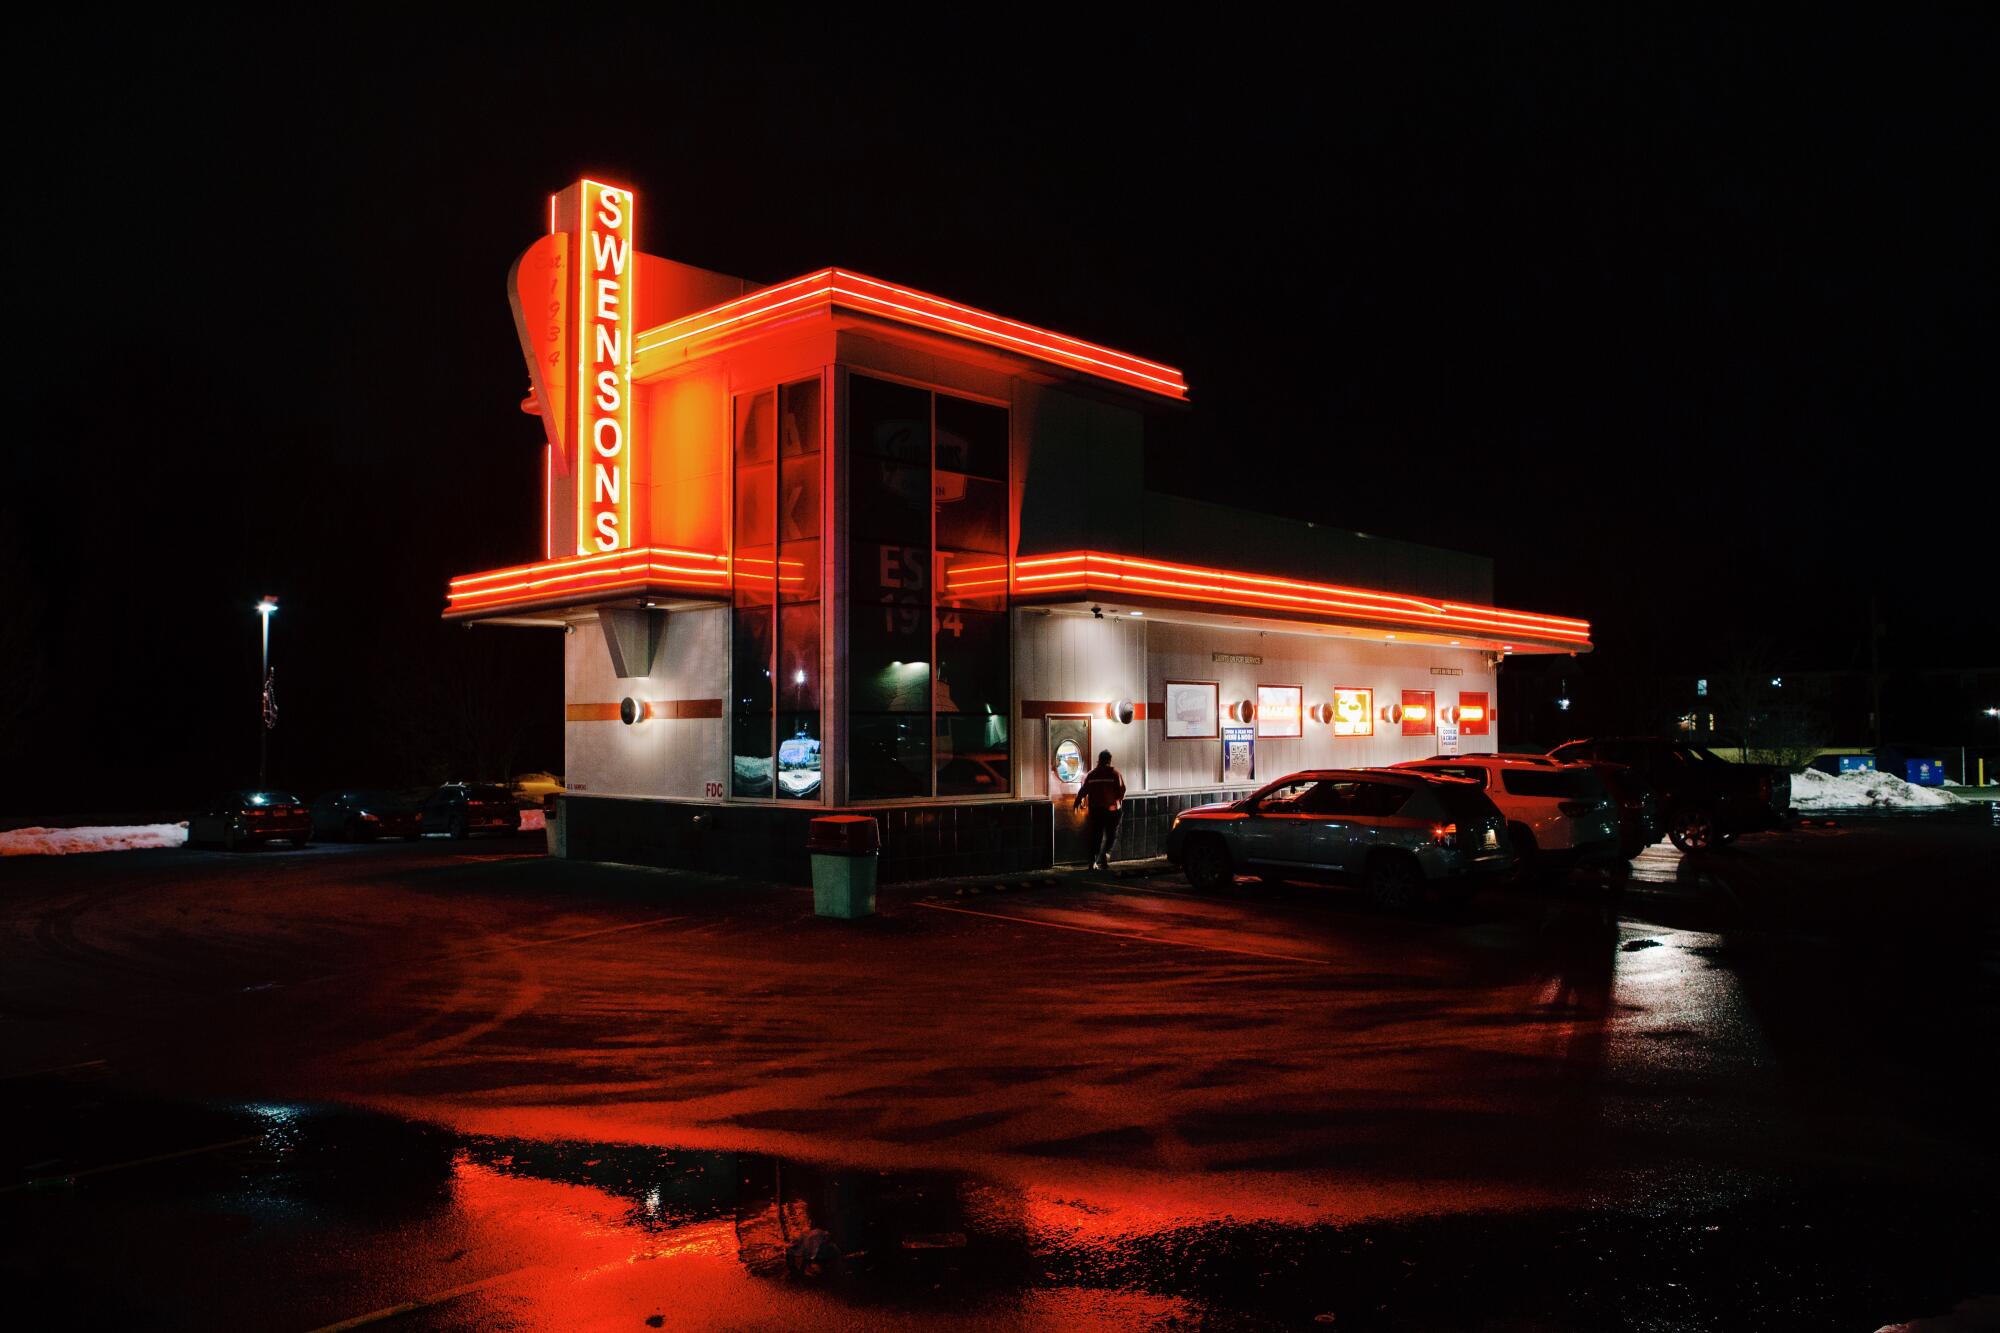 An exterior photo of Swensons in Akron, Ohio.